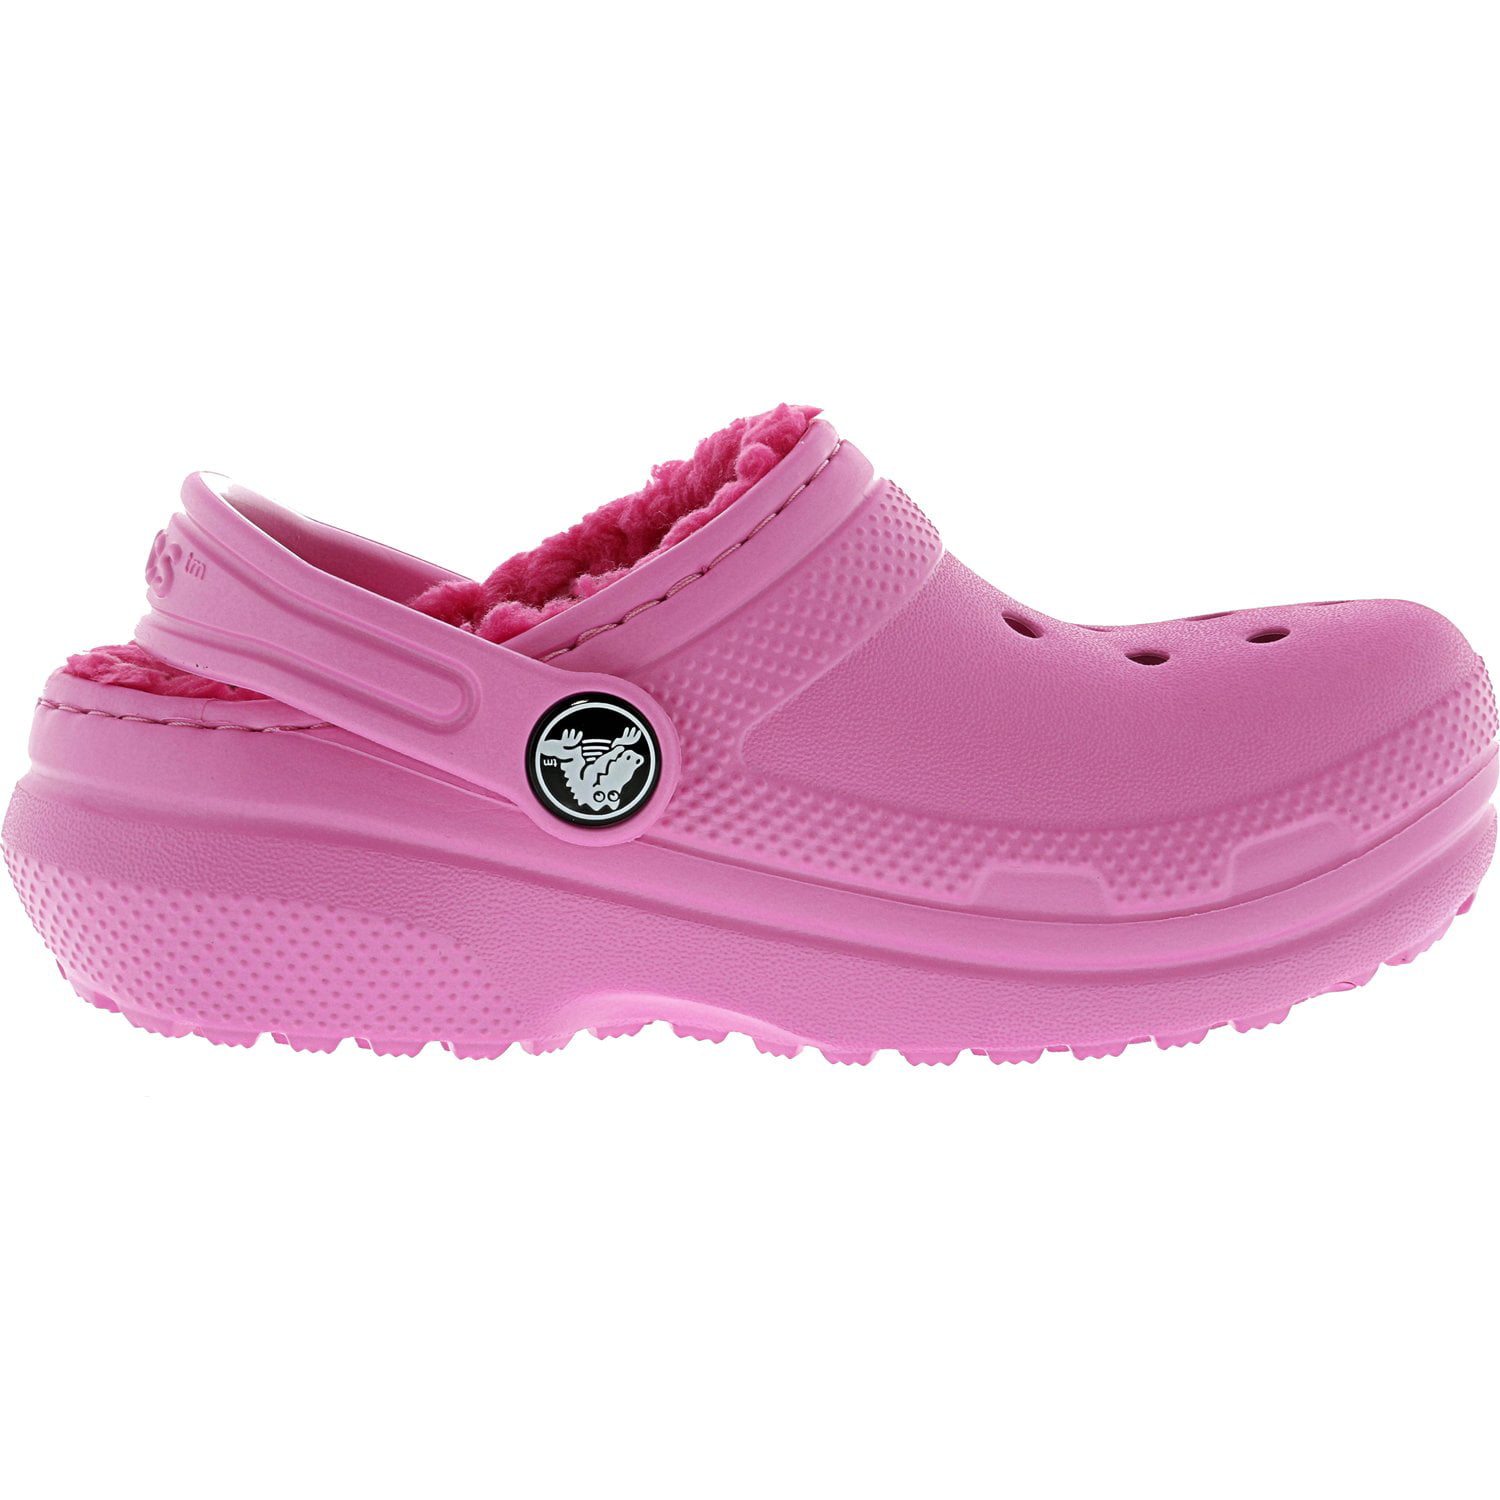 Crocs Classic Lined Clog Party Pink / Candy Rubber Slipper - 3M ...